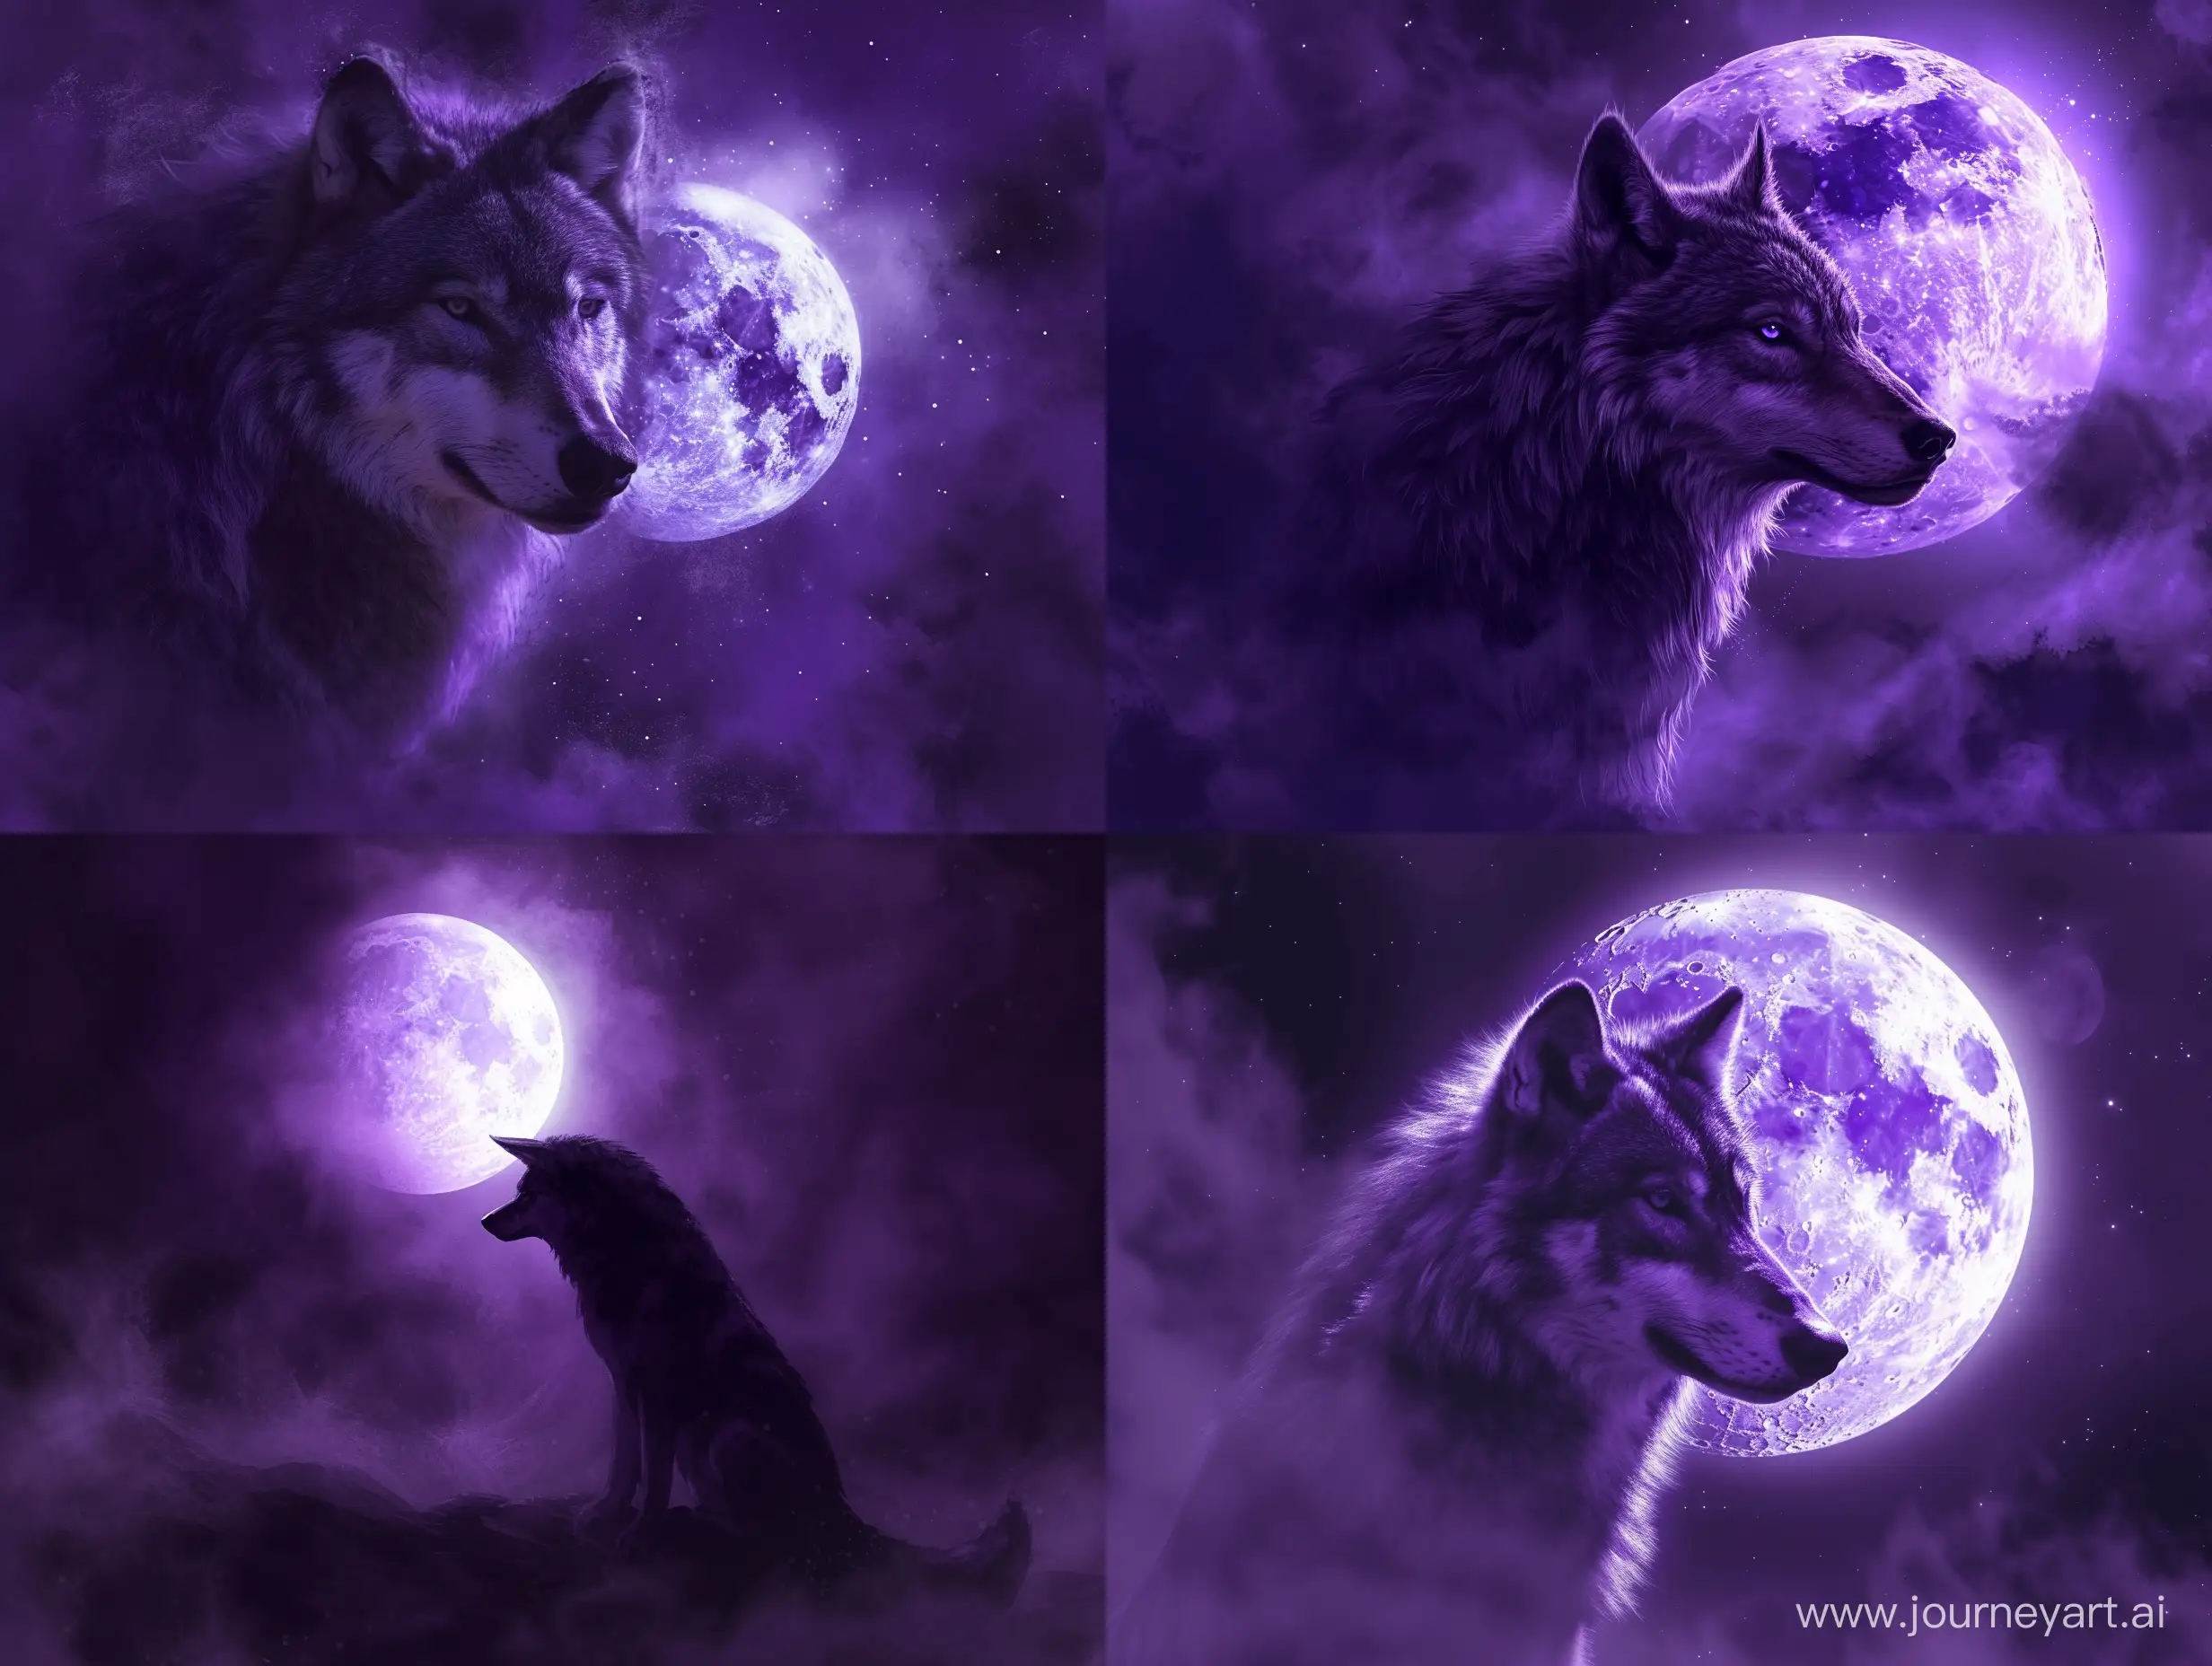 Enchanting-Scene-Majestic-Wolf-Under-the-Radiant-Full-Moon-in-Magical-Purple-Tones